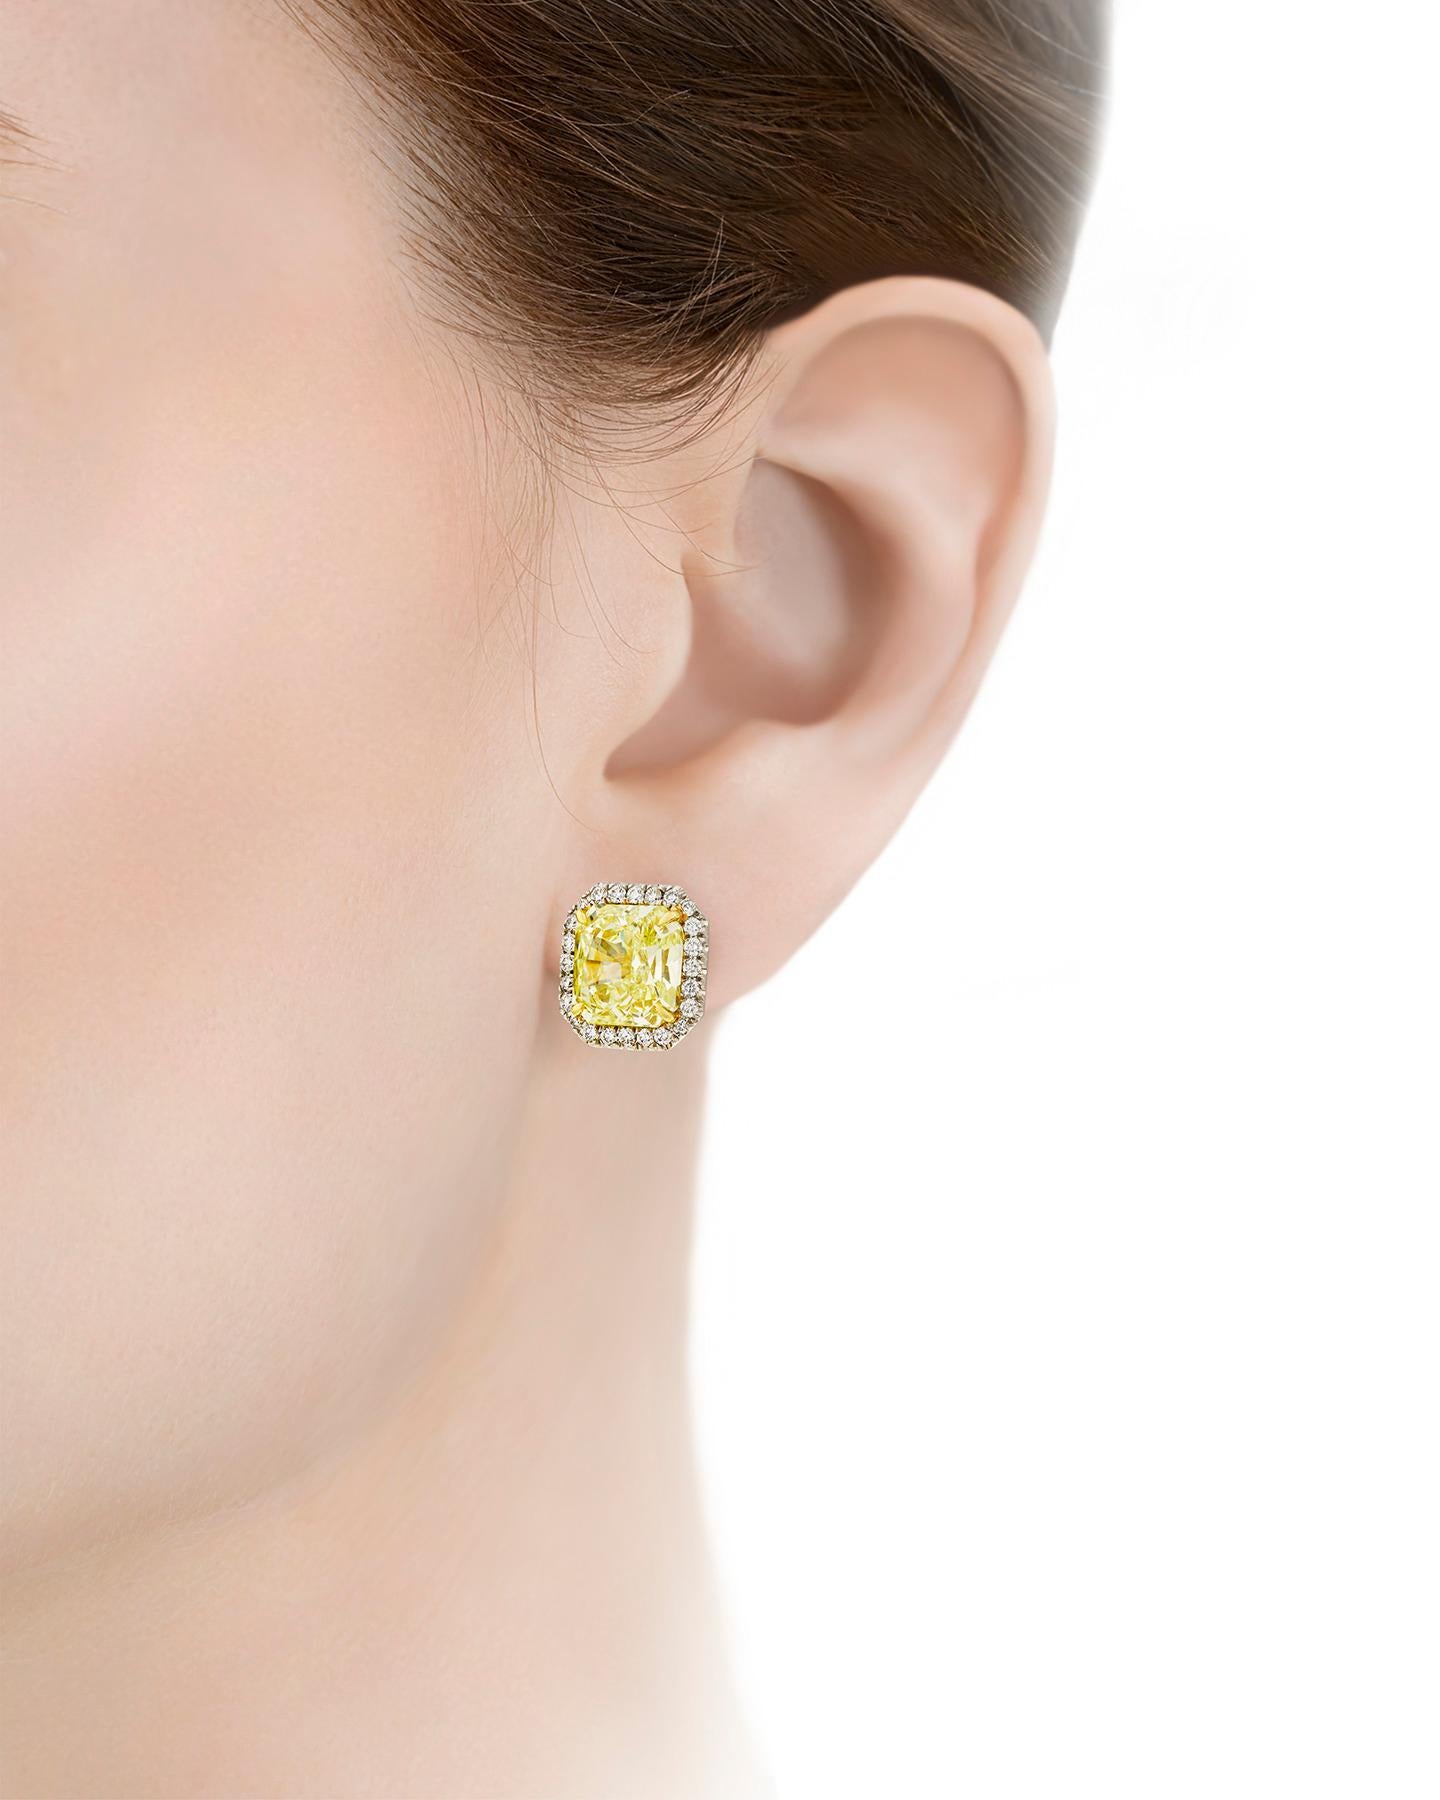 These fancy yellow diamond earrings reflect elegance at its most brilliant. Weighing 3.51 carats and 3.41 carats, the gems possess a radiant yellow hue with even color distribution and VVS2 clarity, meaning they are virtually flawless to the naked